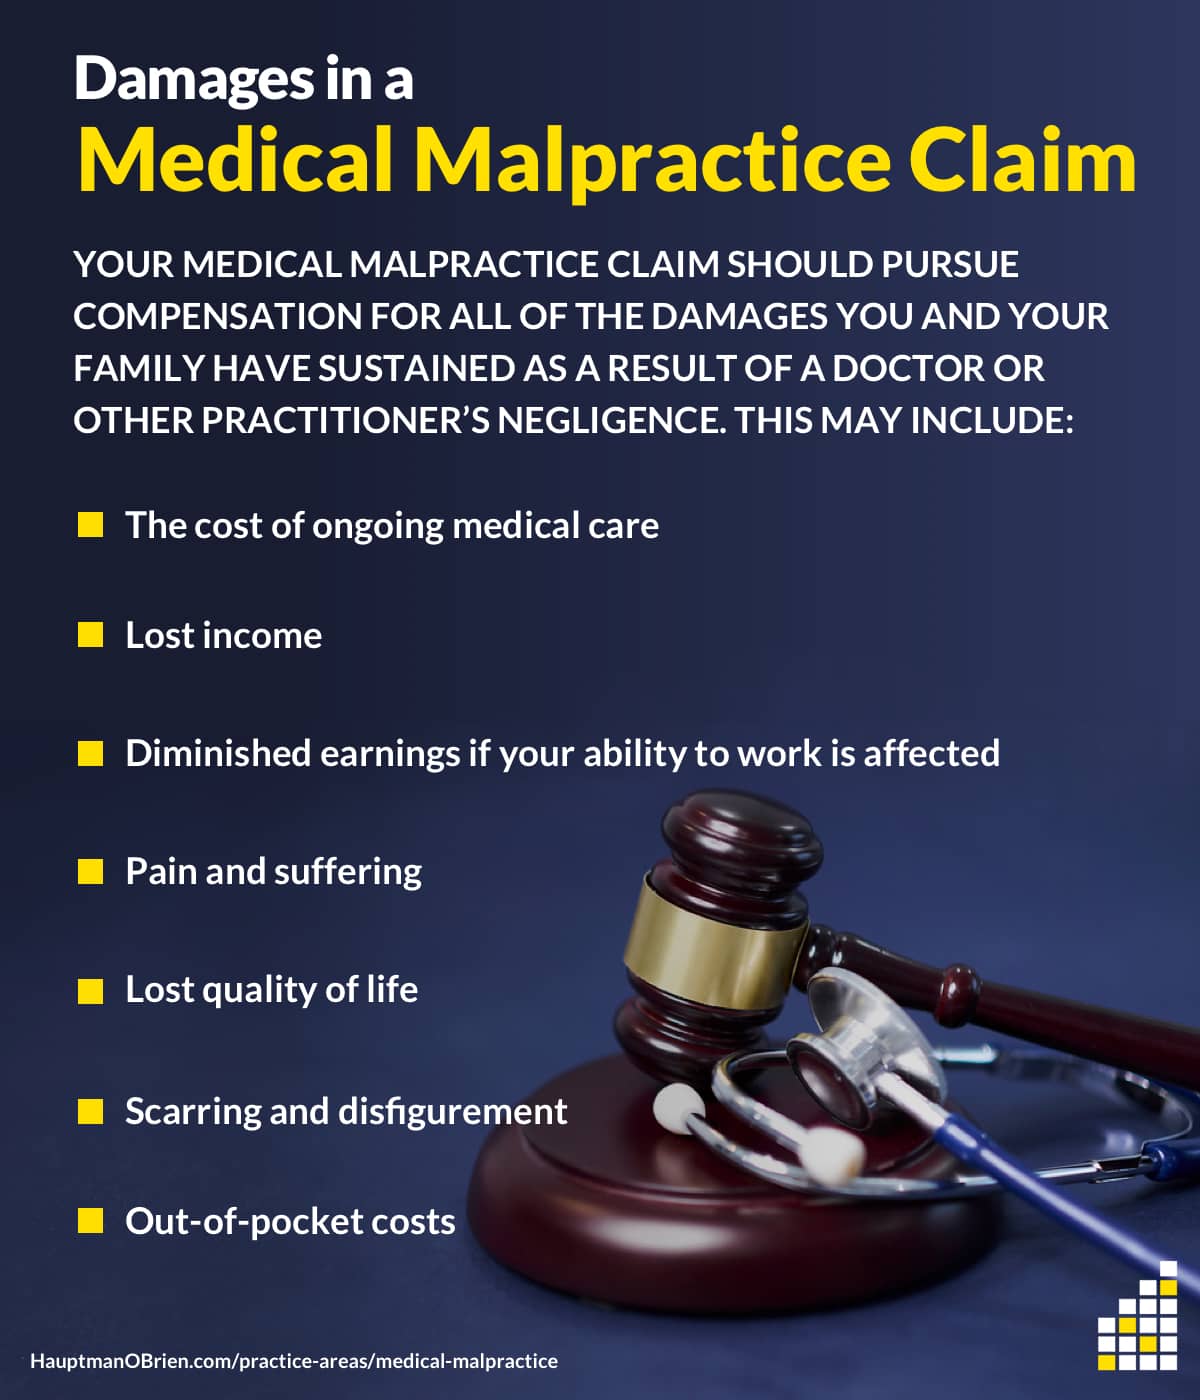 Damages in a Medical Malpractice Claim